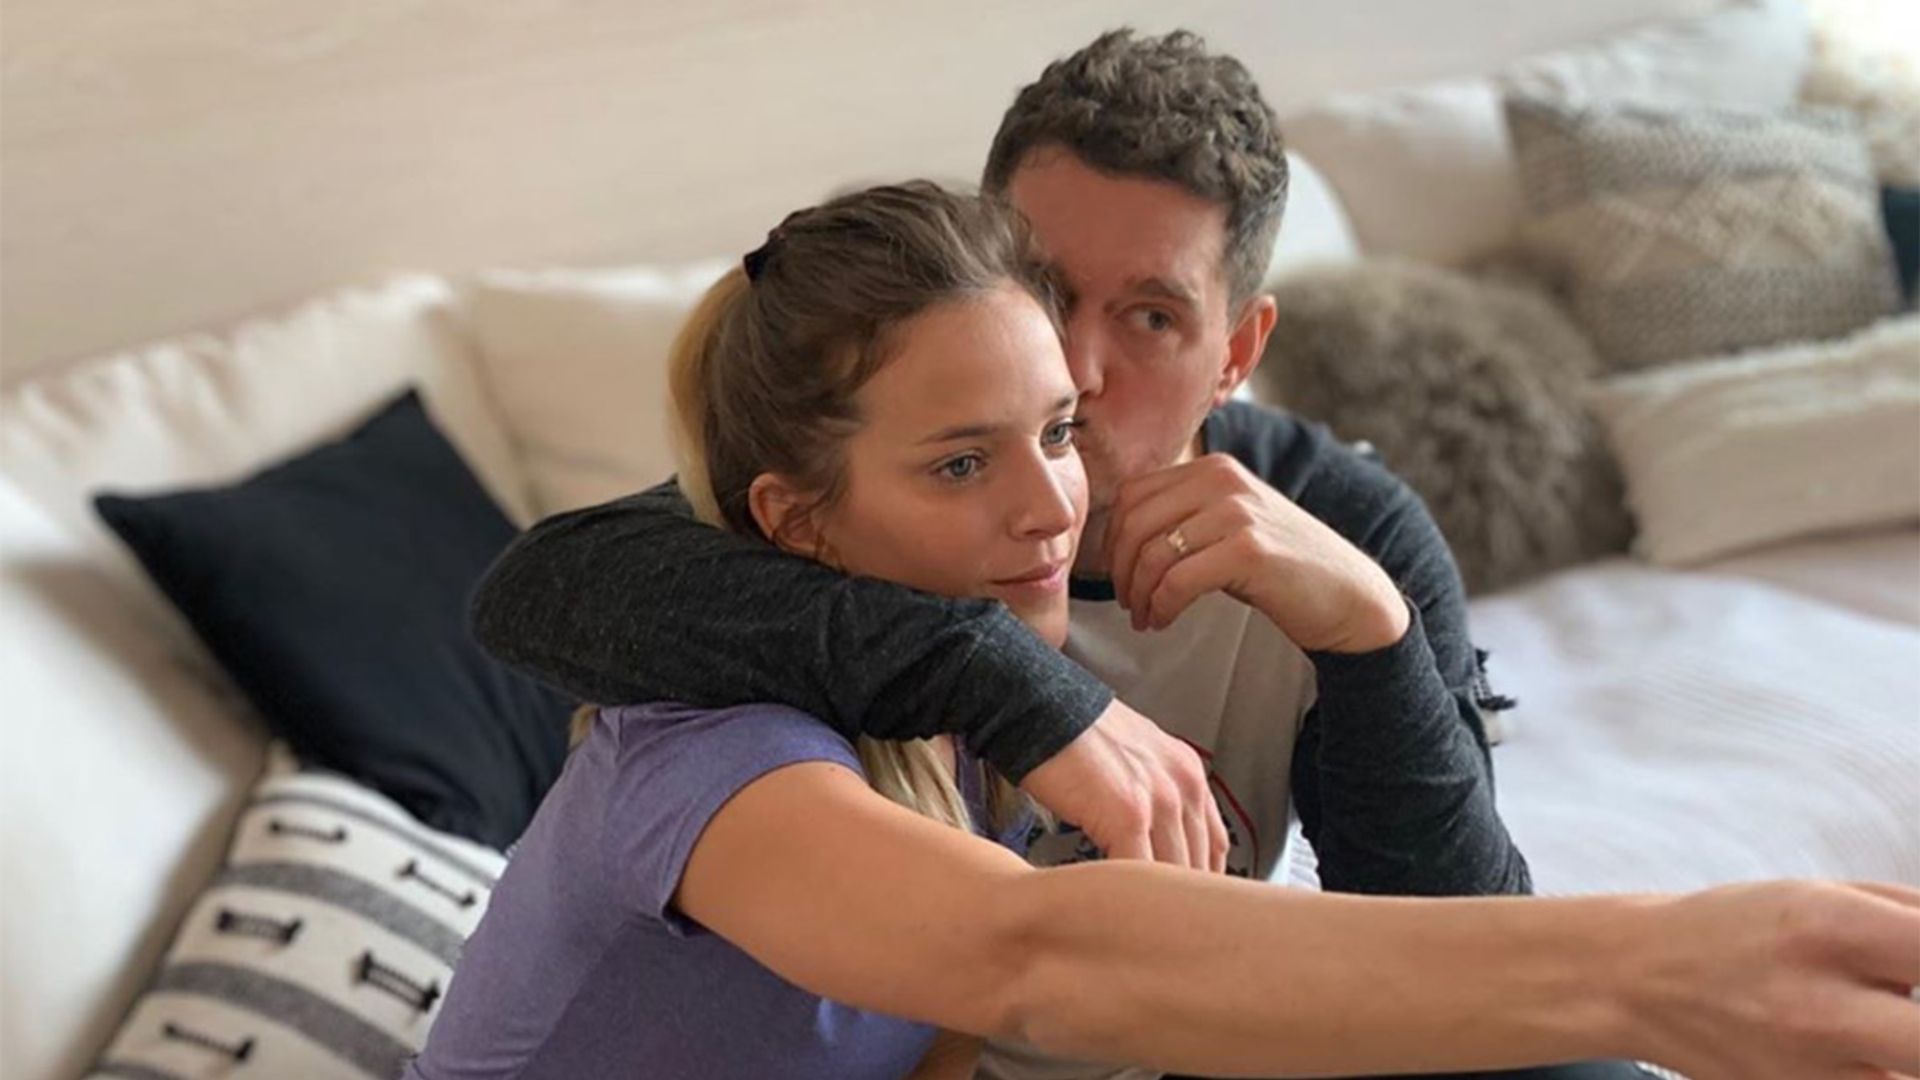 Michael Buble's wife Luisana Lopilato thanks fans after being forced to defend her marriage